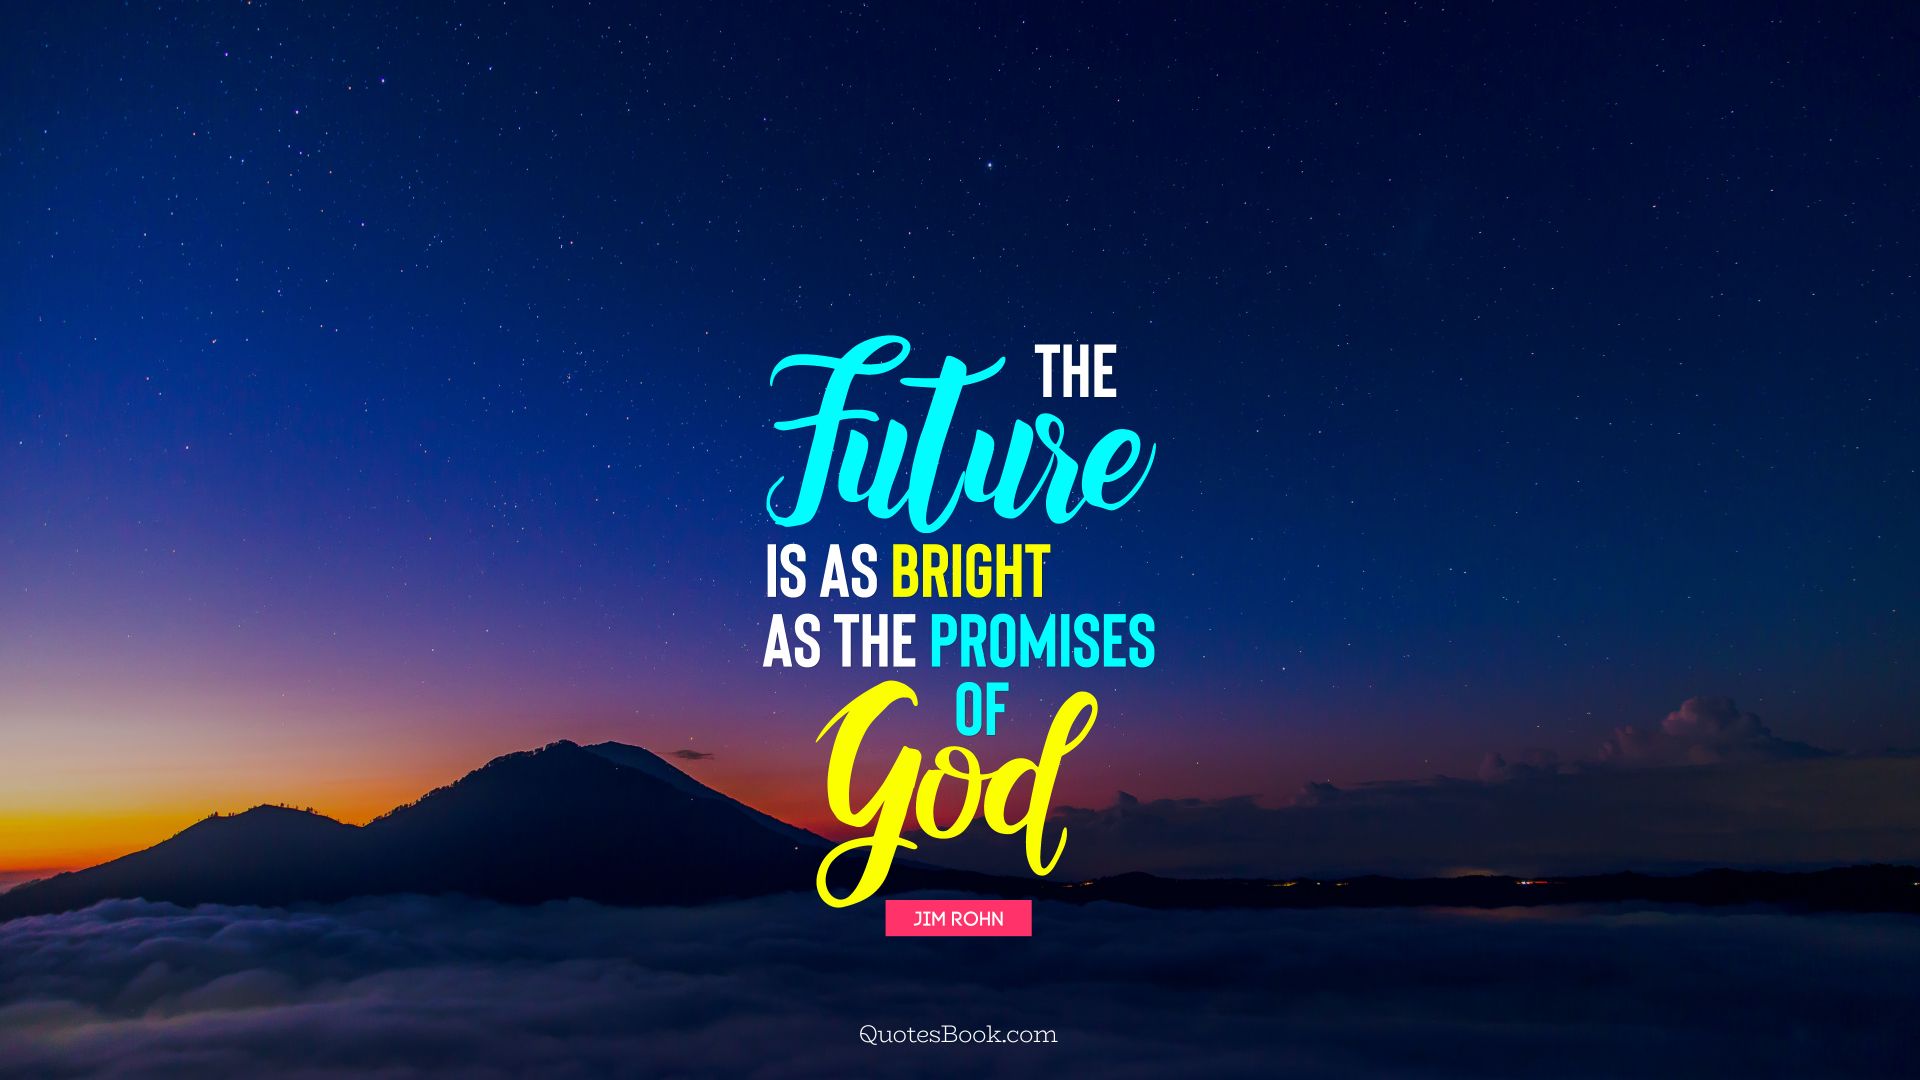 The future is as bright as the promises of God. - Quote by Jim Rohn